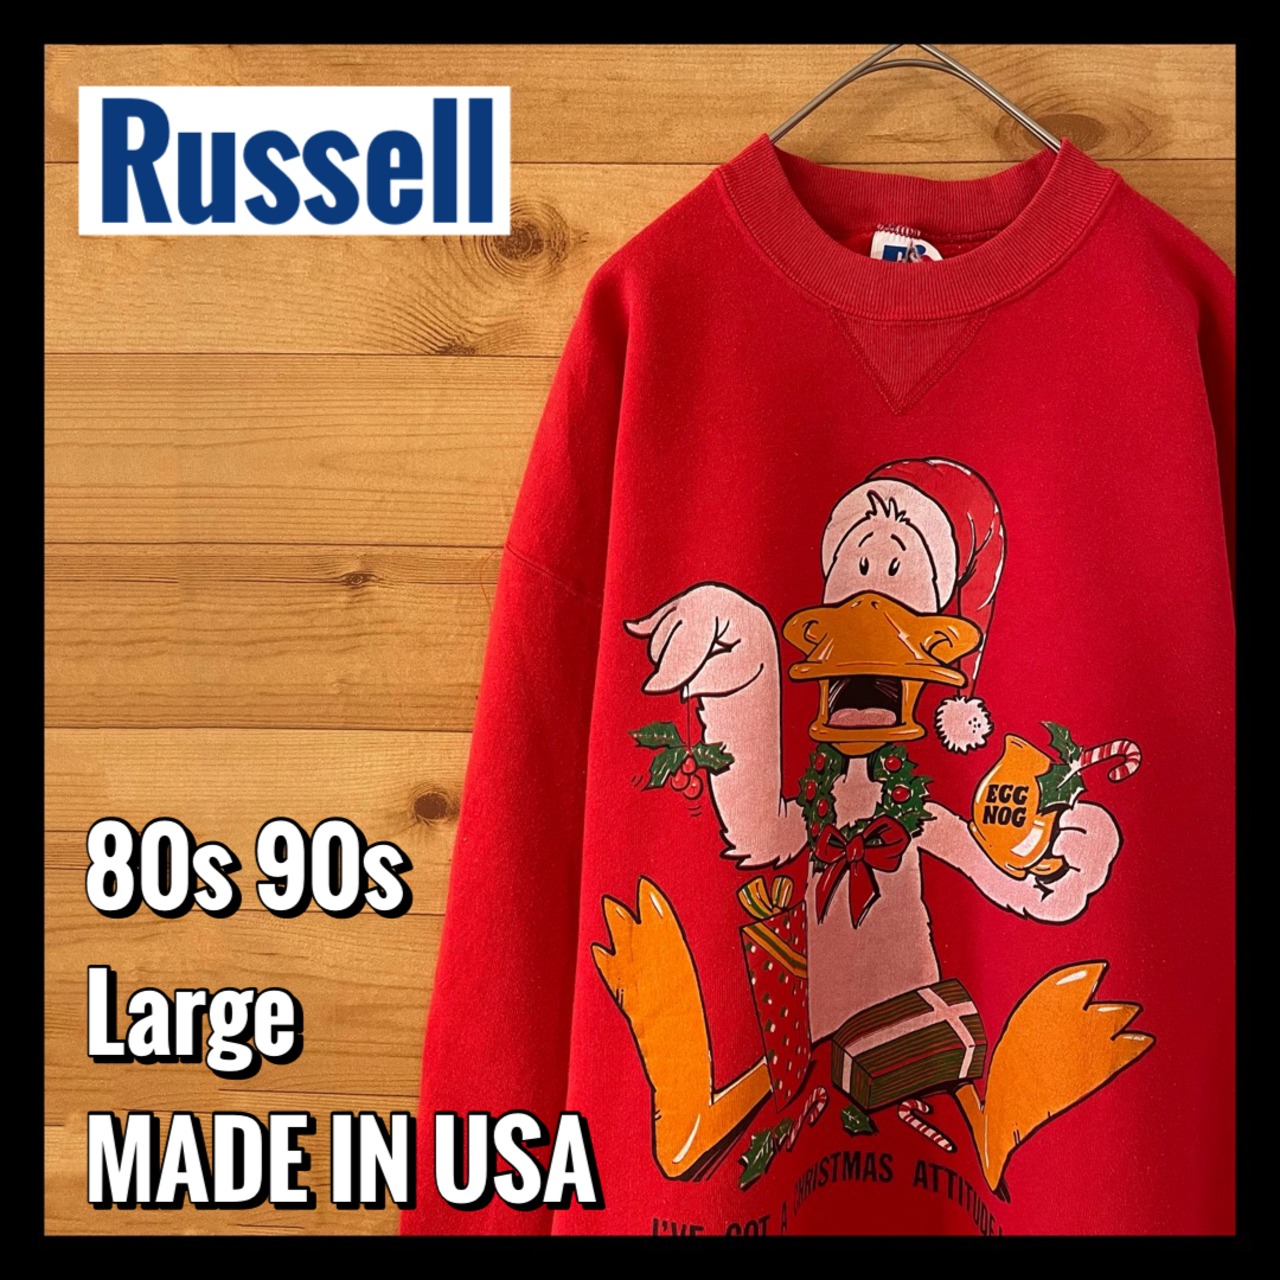 【Russell】80s 90s USA製 プリント イラスト スウェット トレーナー アメリカ古着